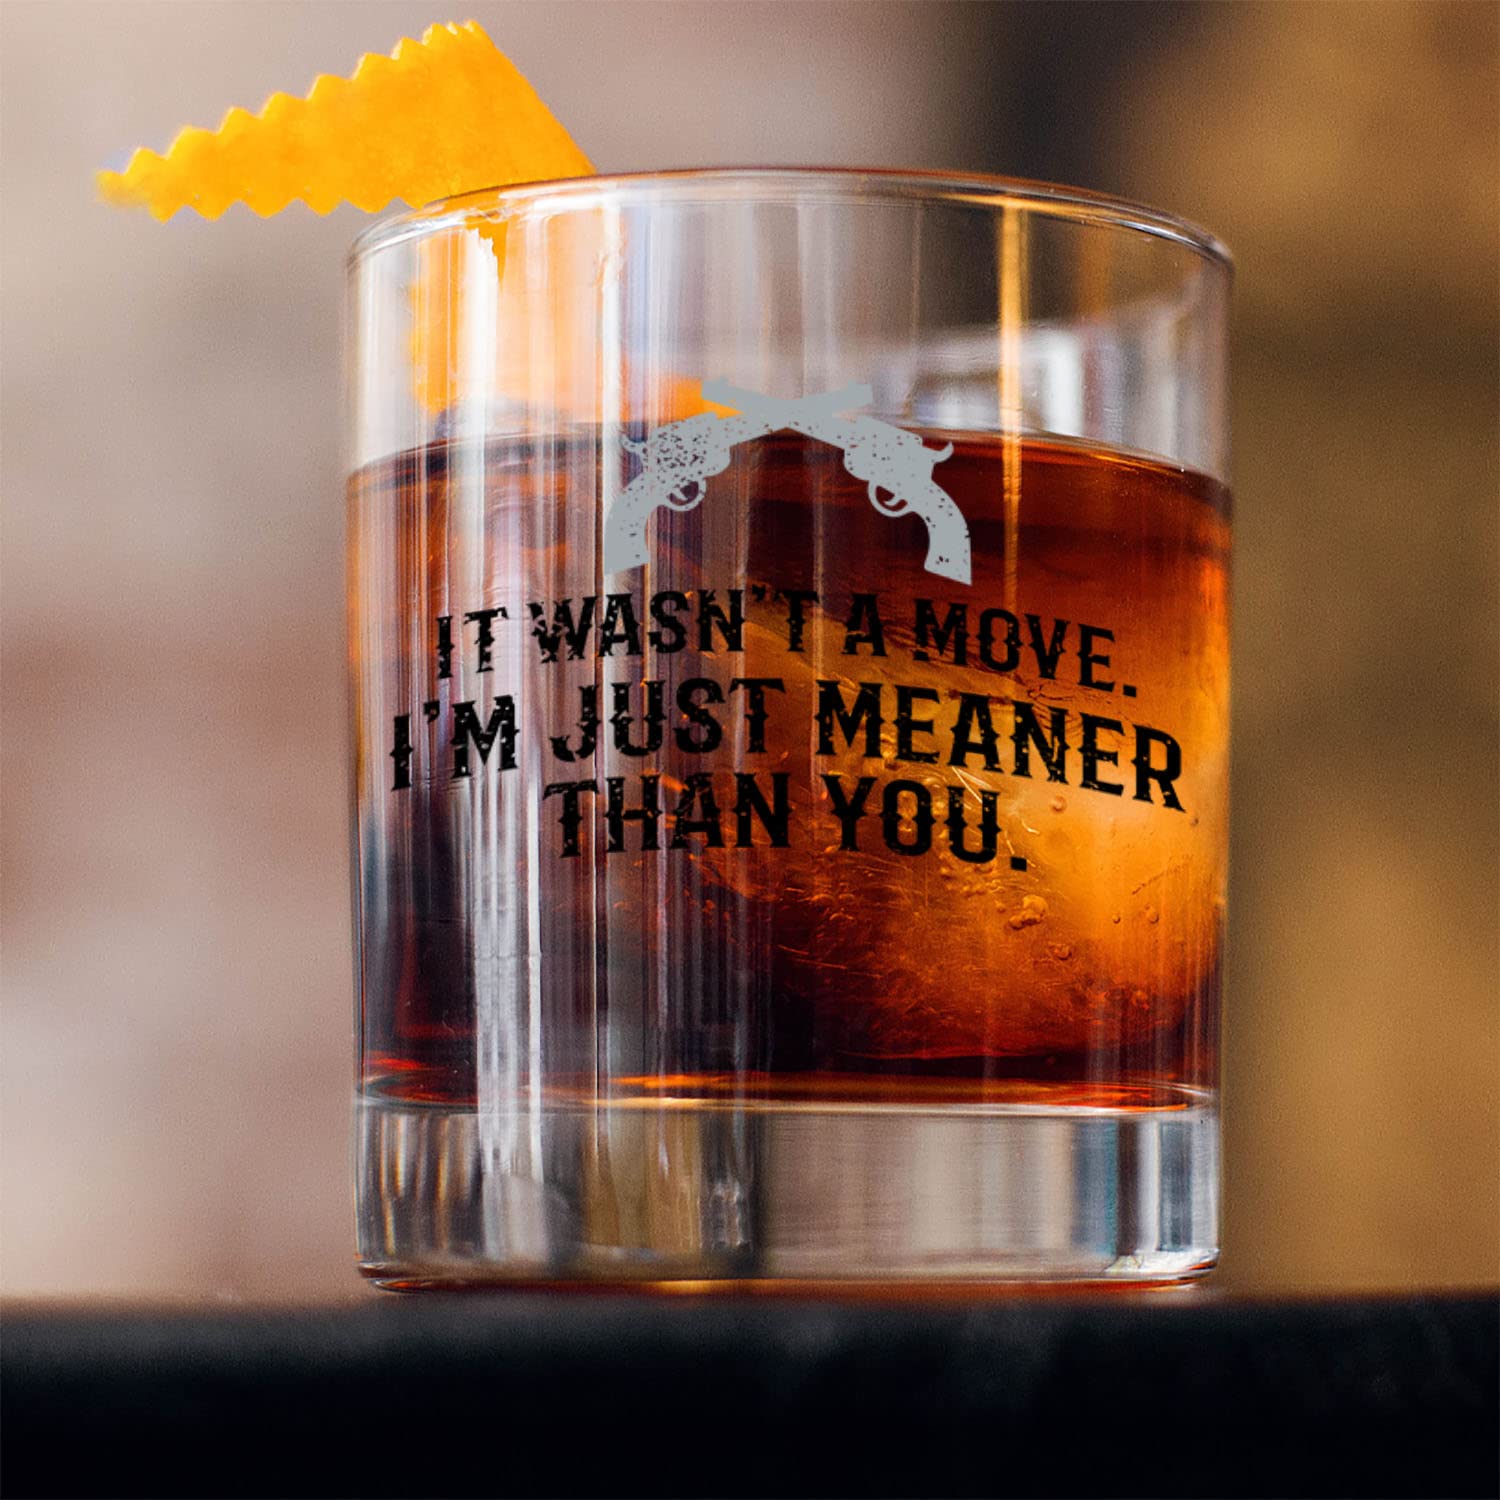 Toasted Tales I'm Just Meaner than You | Old Fashioned Whiskey Glass Tumbler 11 oz. | Rocks Barware | Quality Chip Resistant Home Bar Whiskey Gift